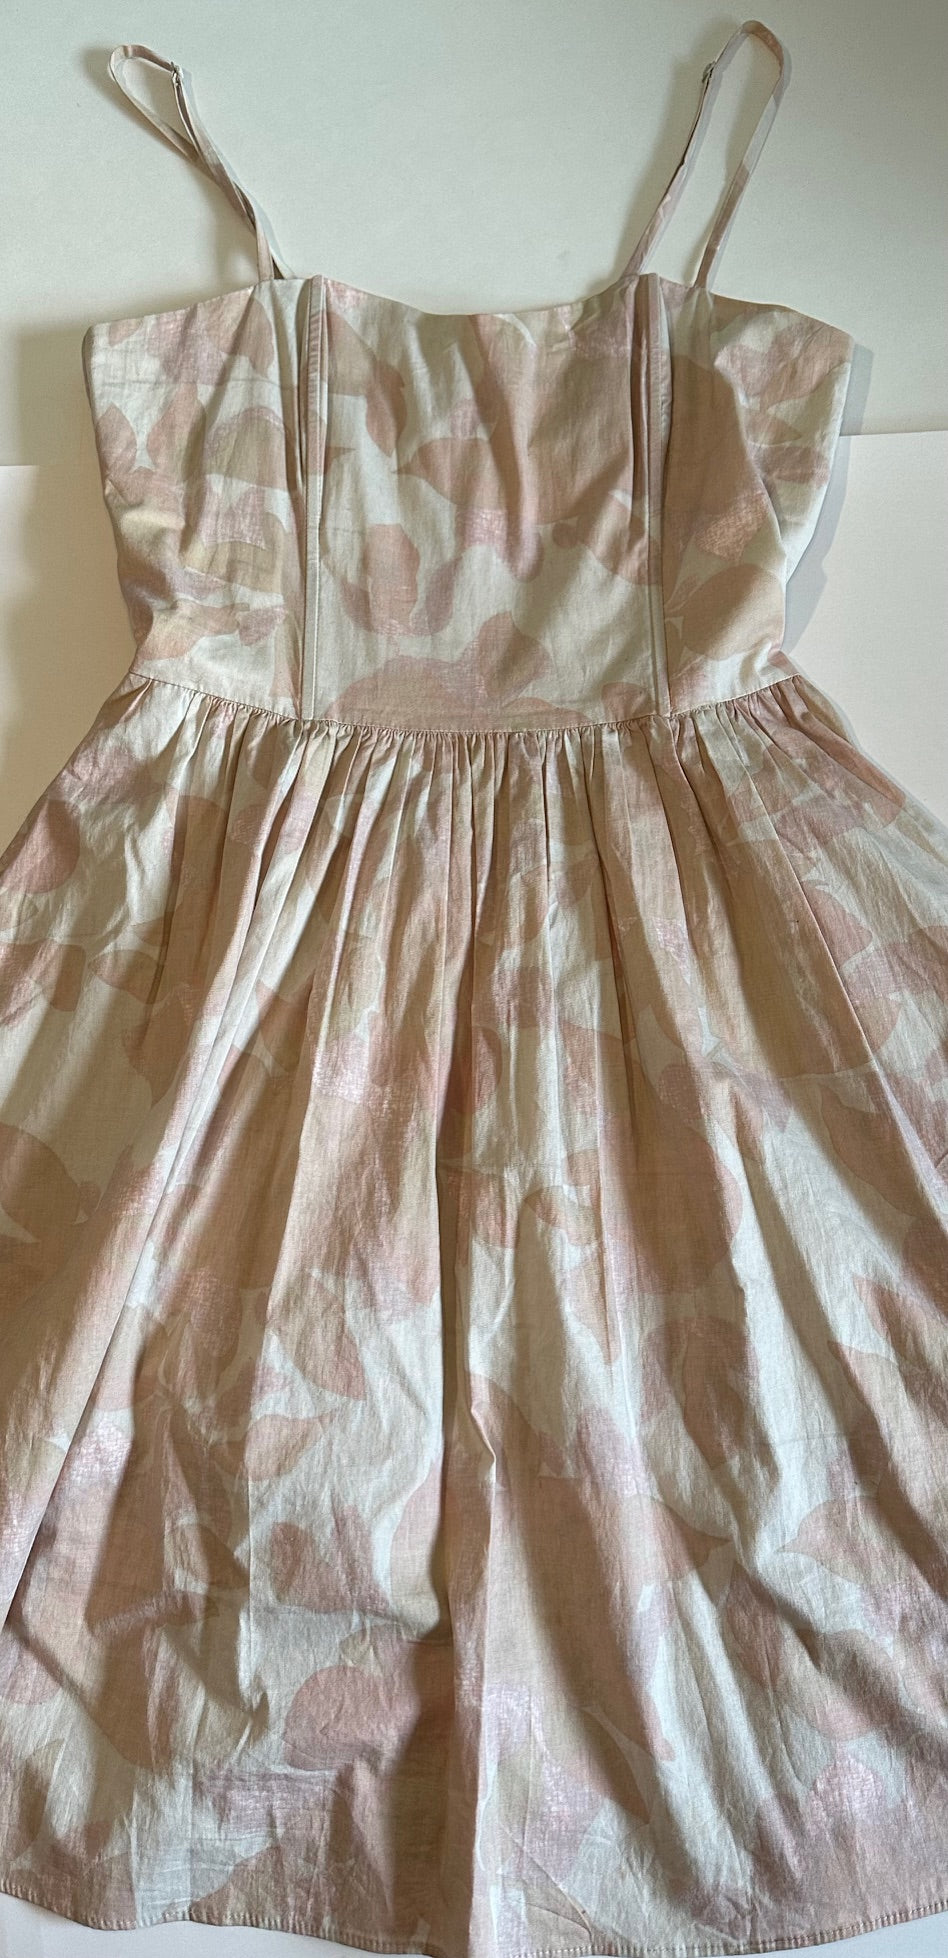 *Adult* H&M, Pale Pink and Beige Dress - Size 8